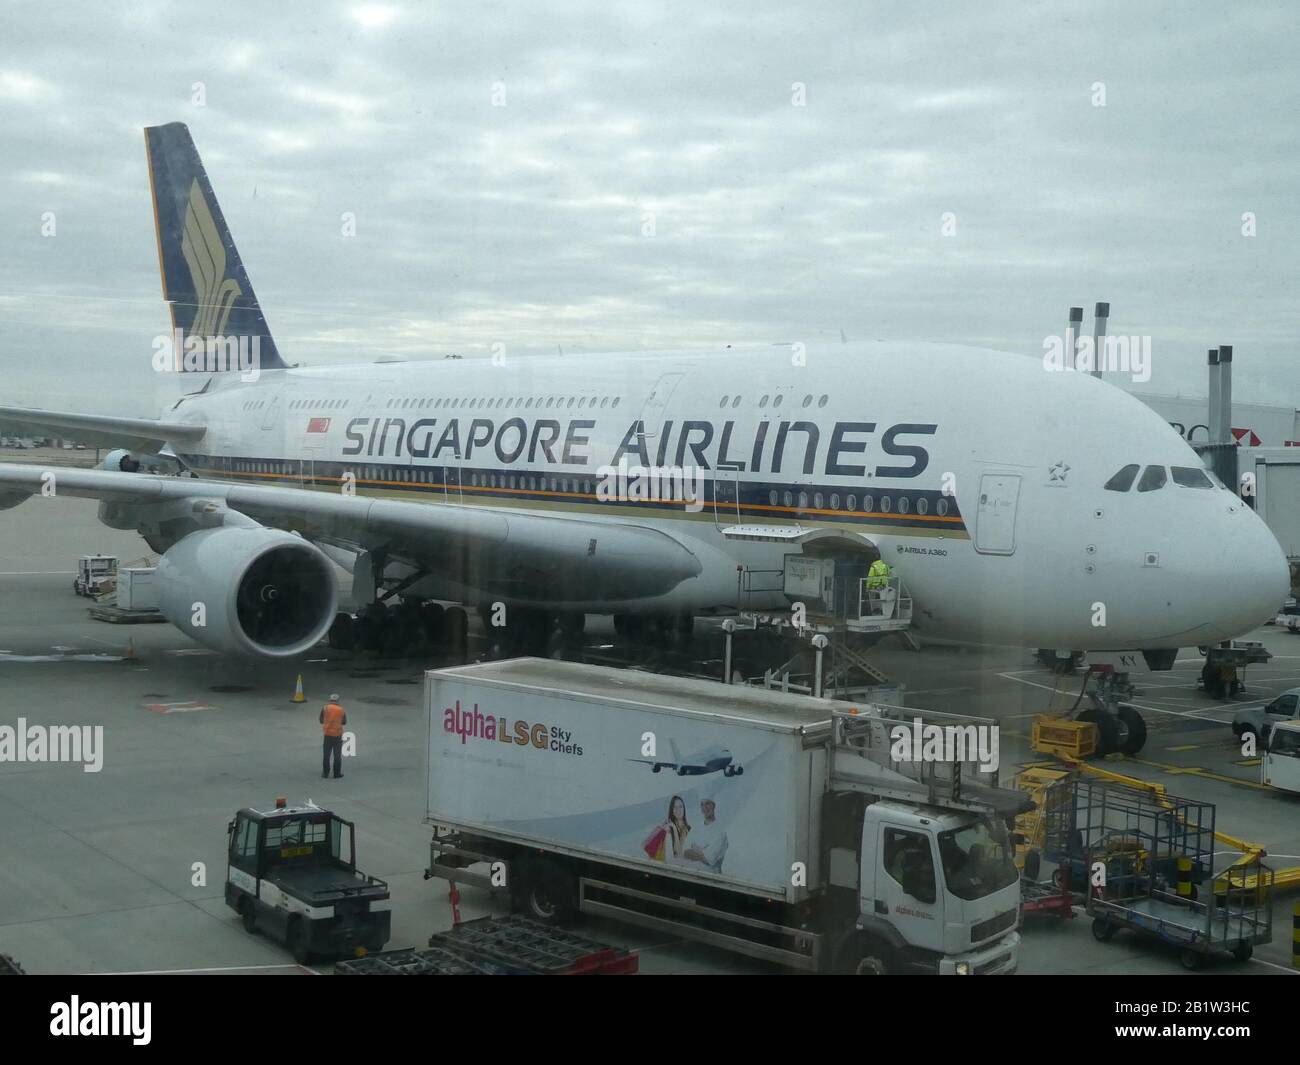 Singapore Airlines A380 Plane docked at London Heathrow Airport Stock Photo